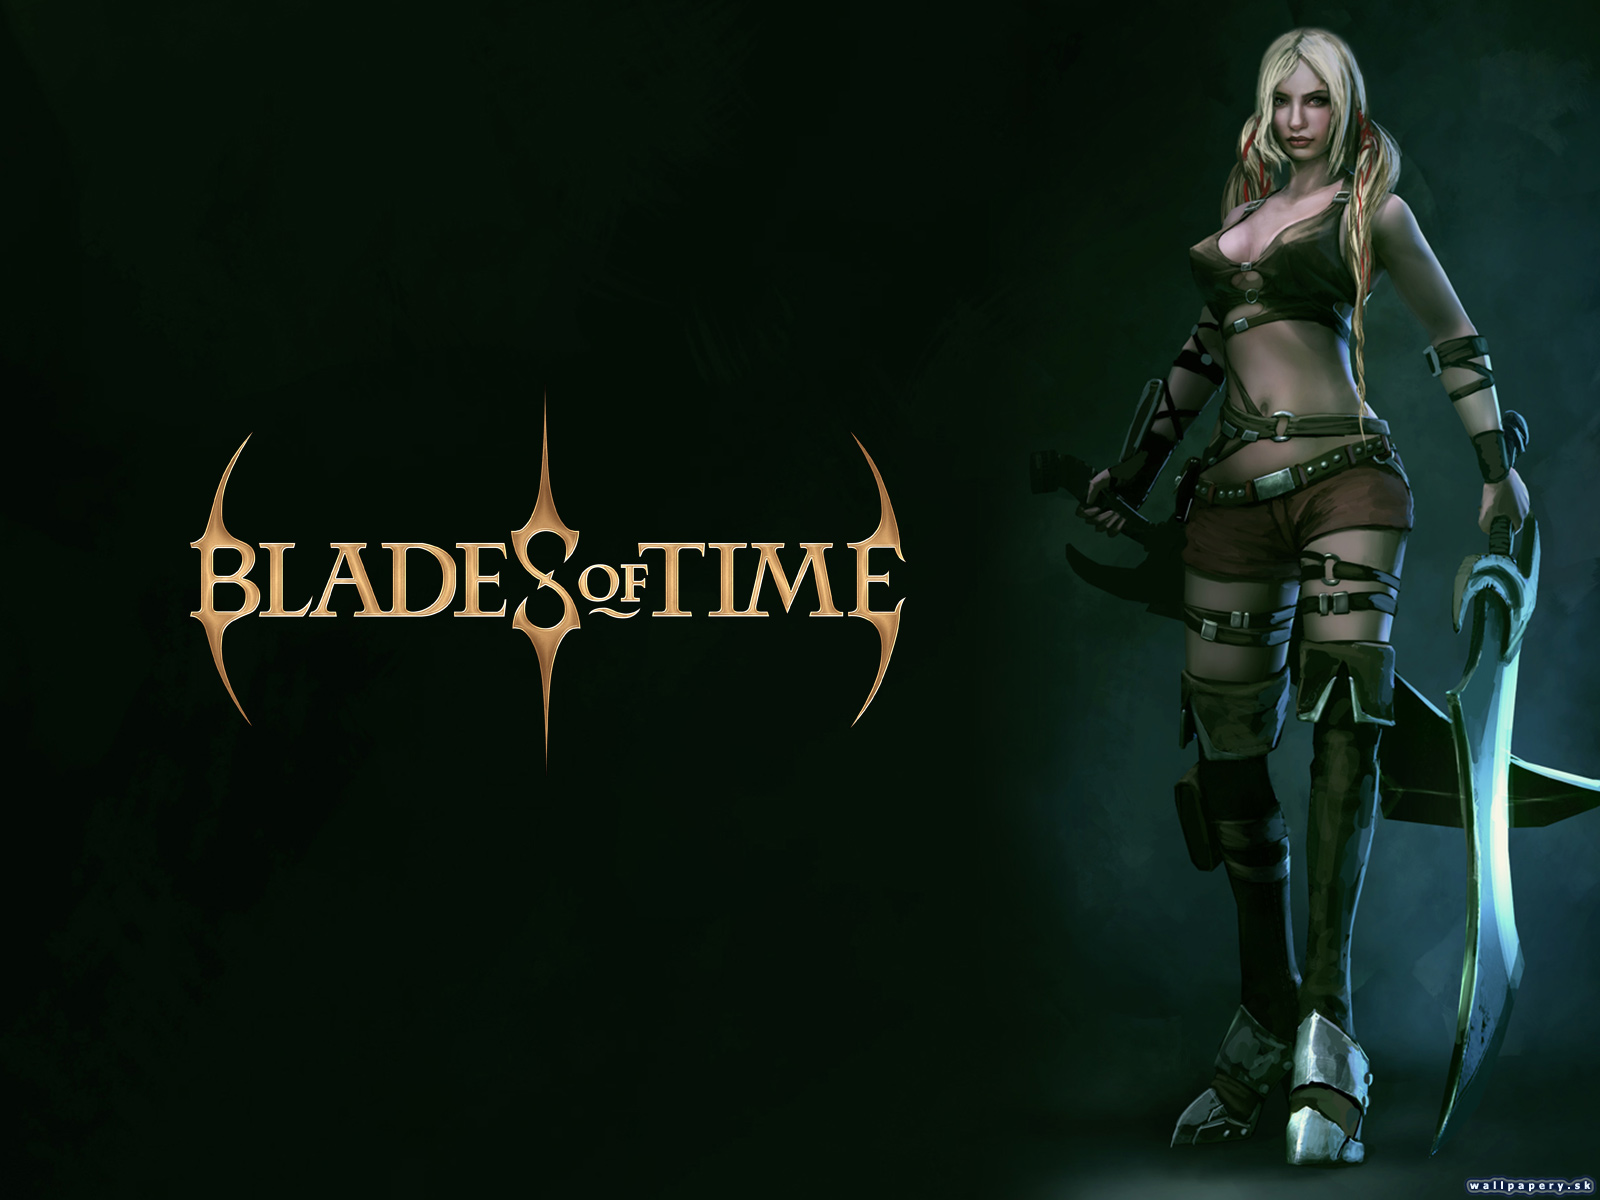 Blades of Time - wallpaper 4